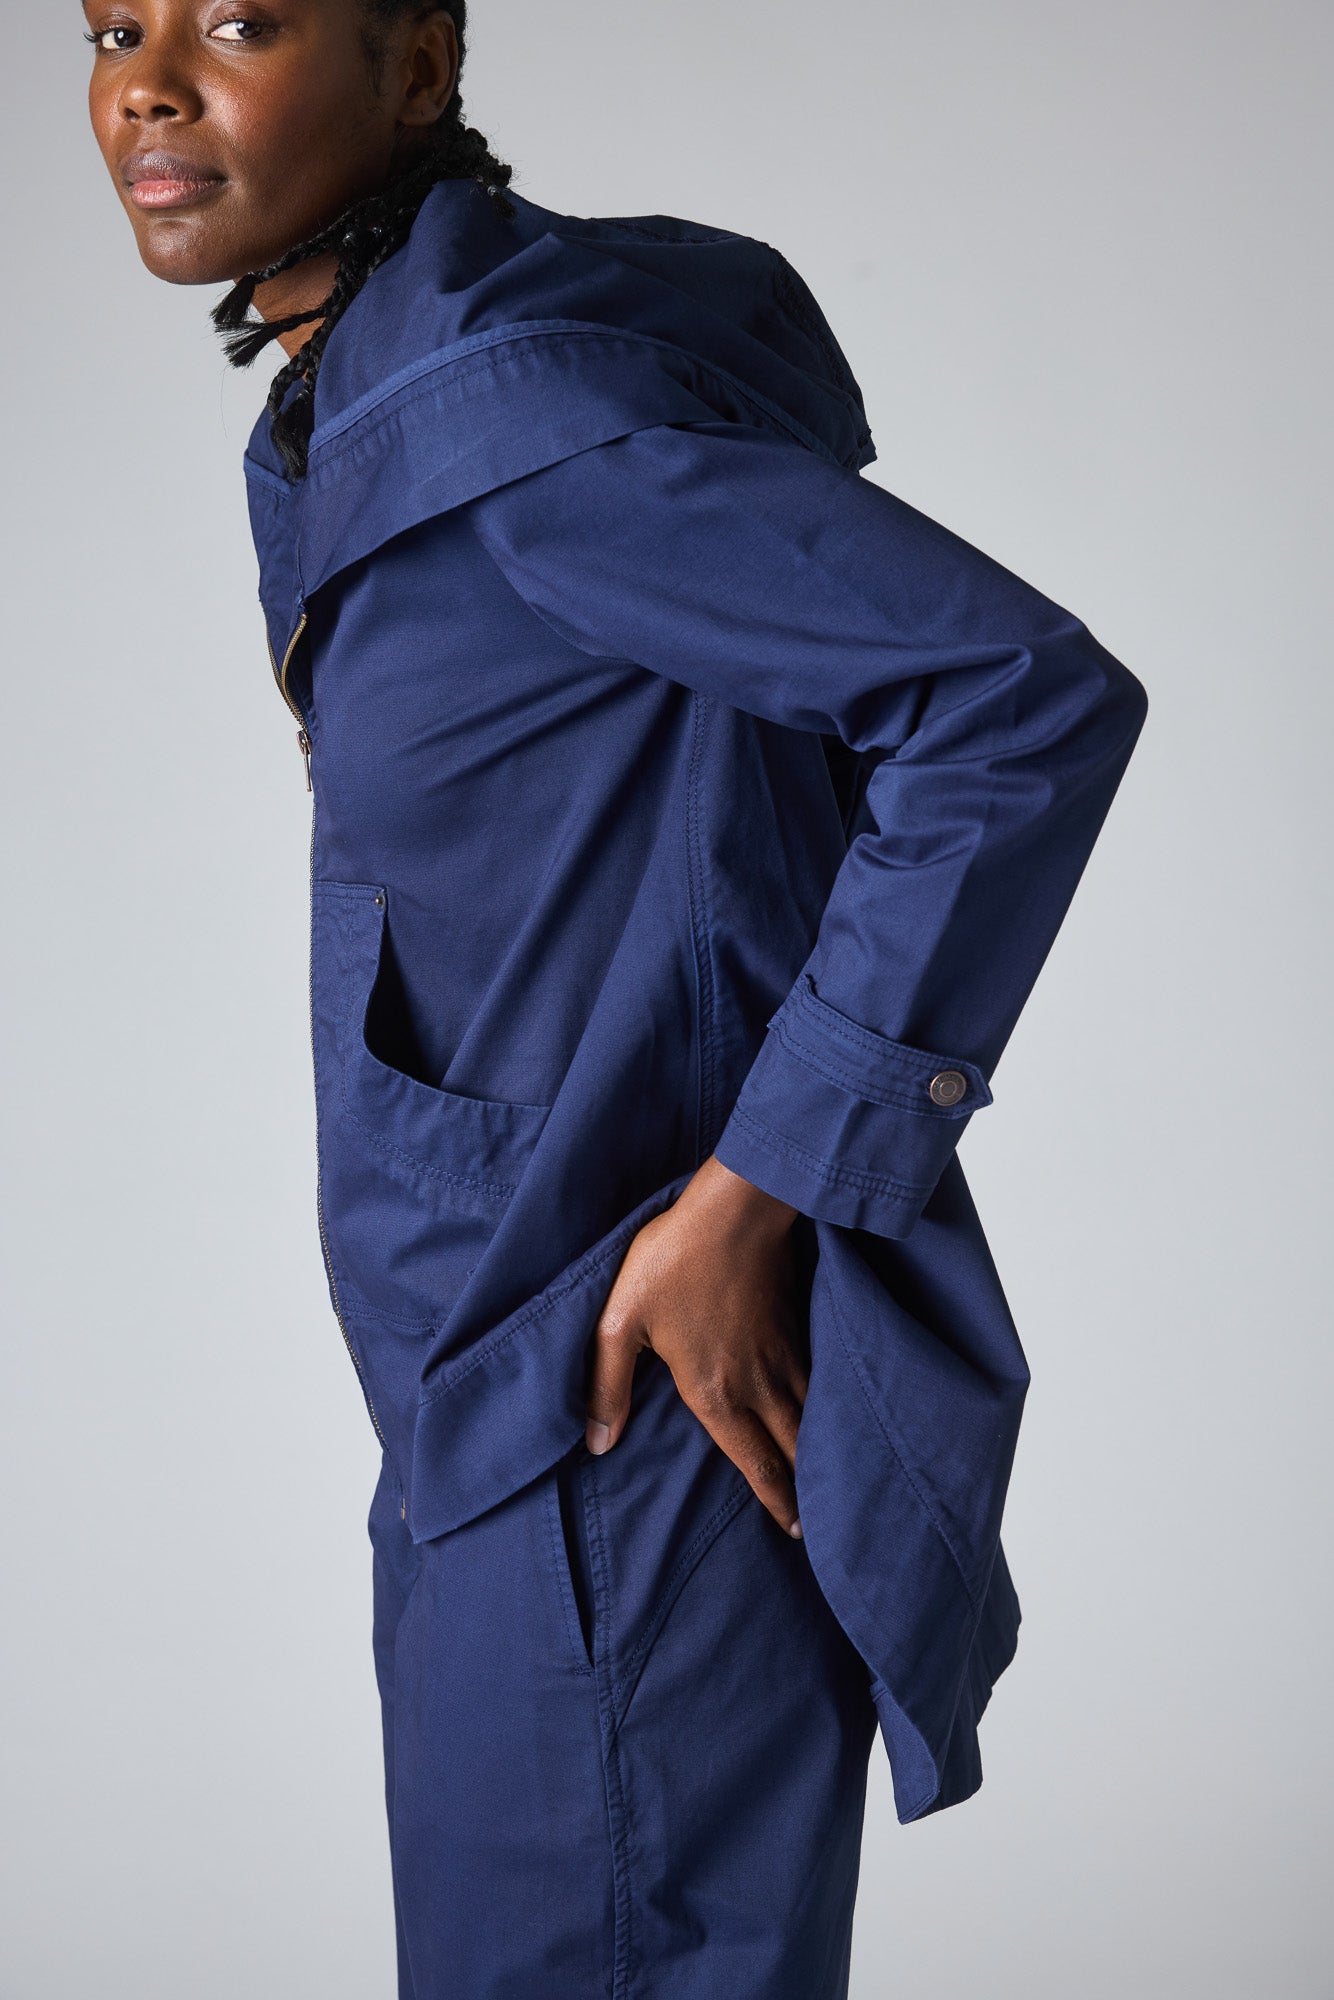 At Ease Twill Swing Jacket